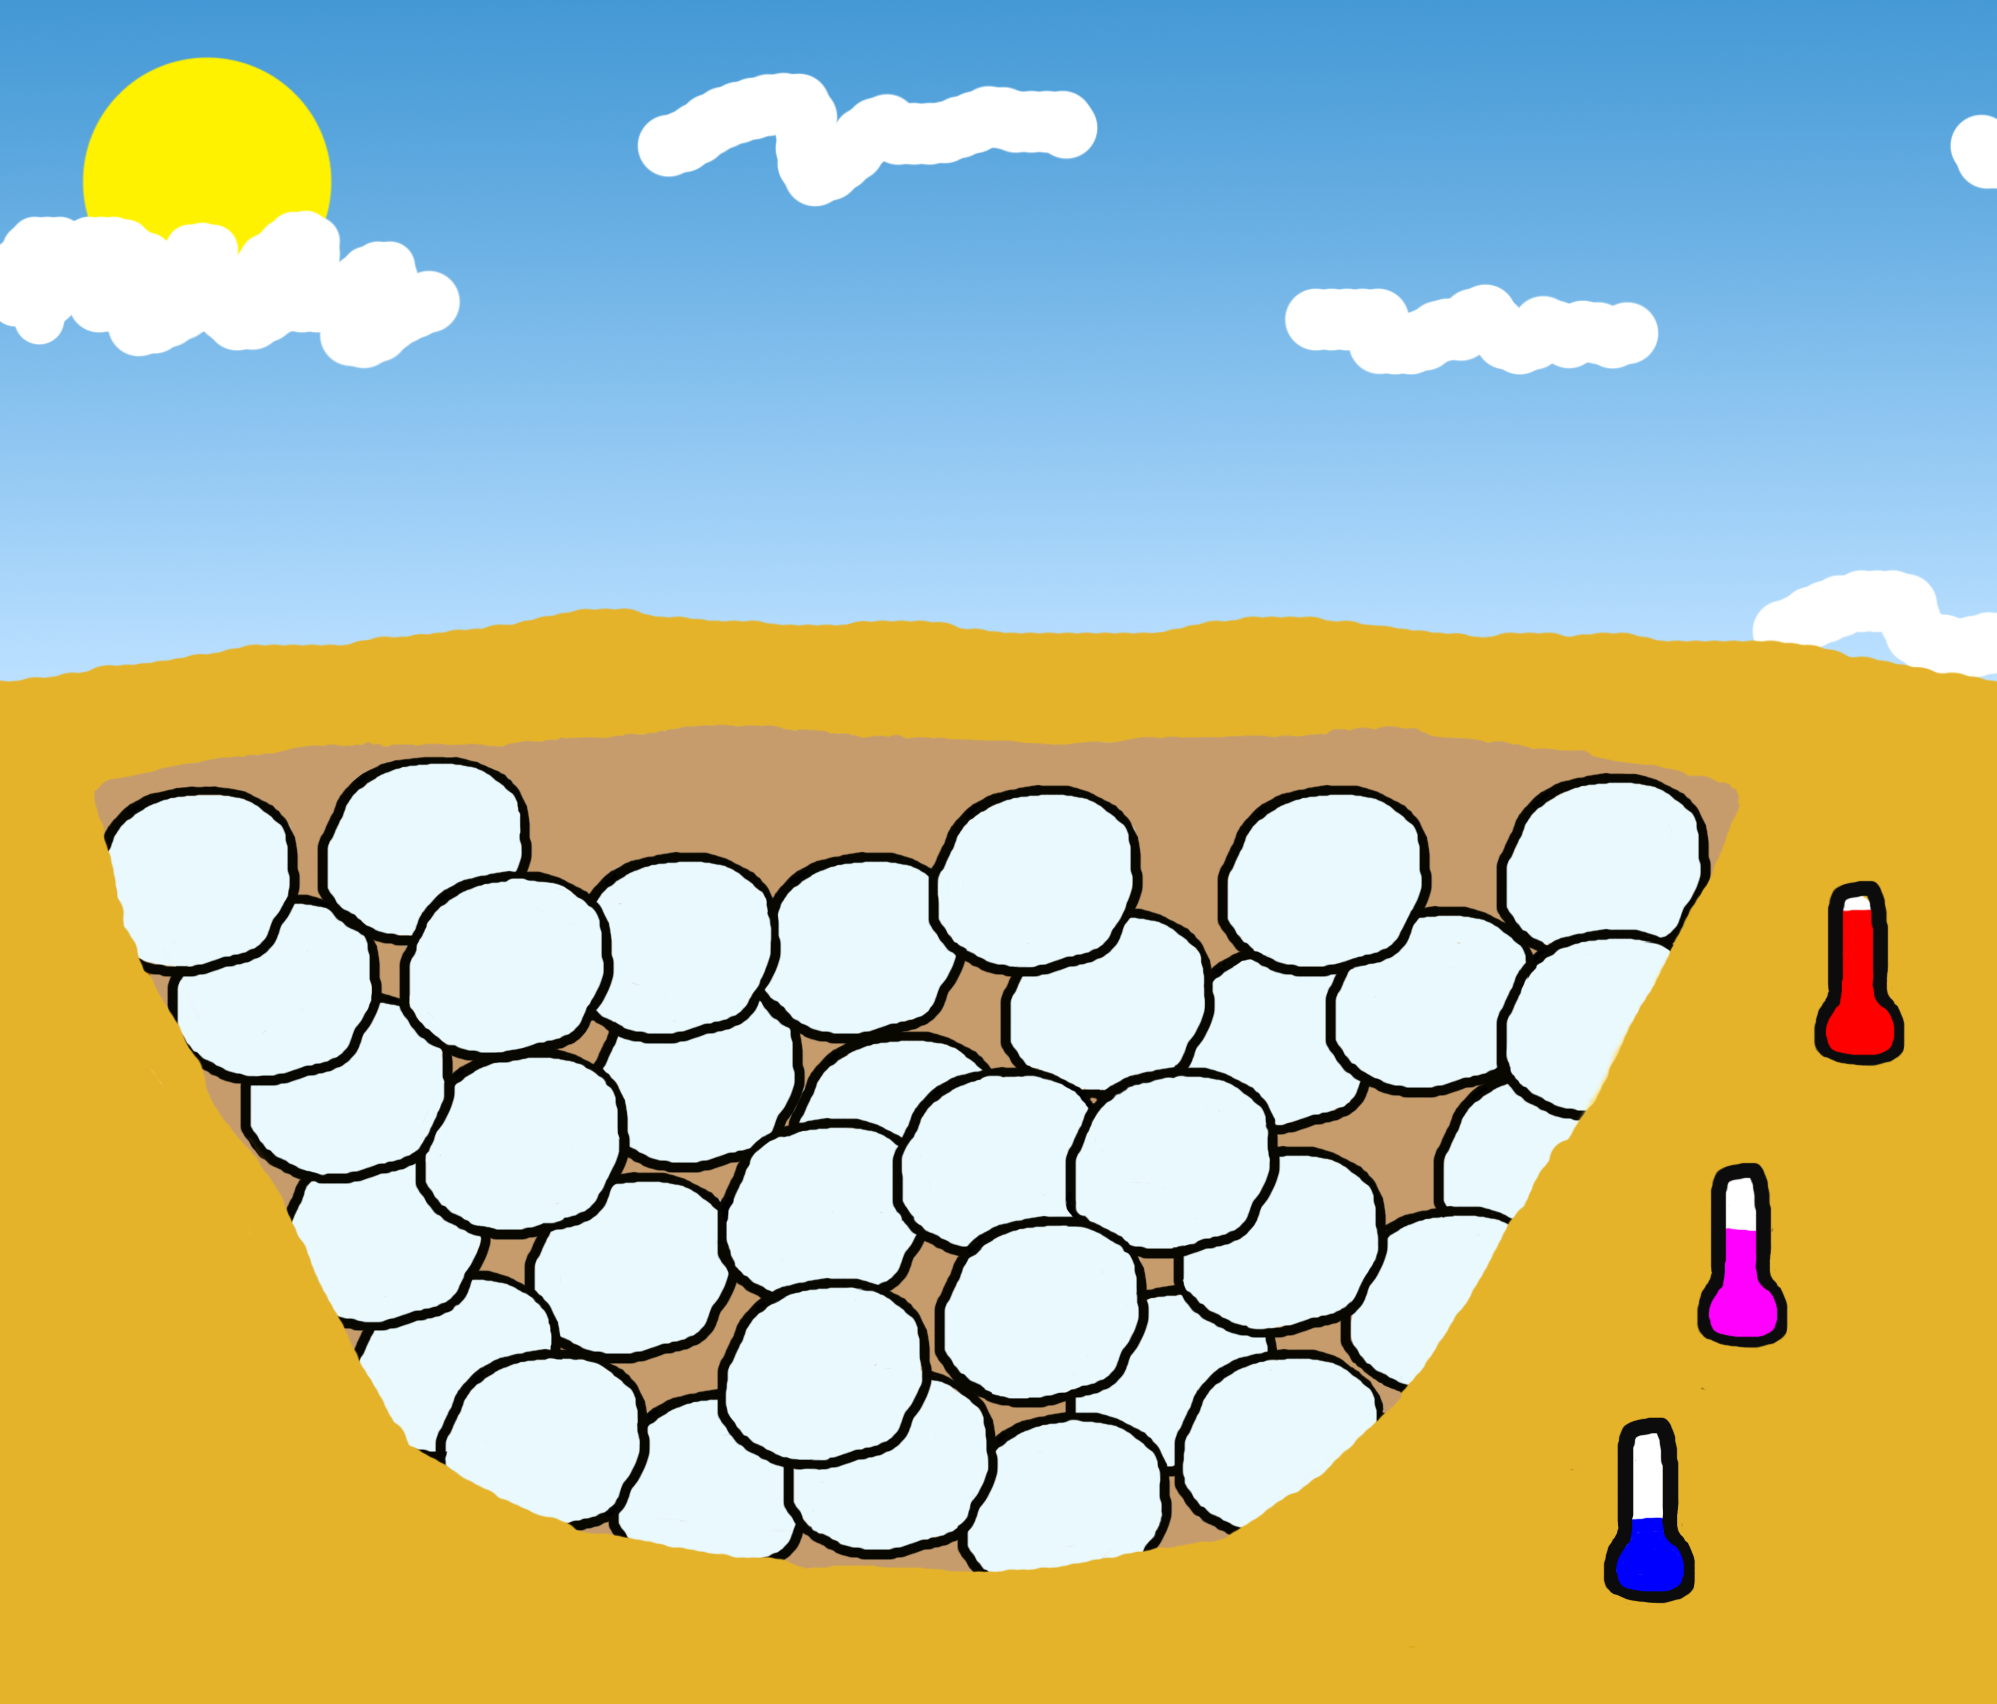 Multiple eggs are buried in a pit underground. The temperature is coolest at the bottom of the pit and rises close to the surface.